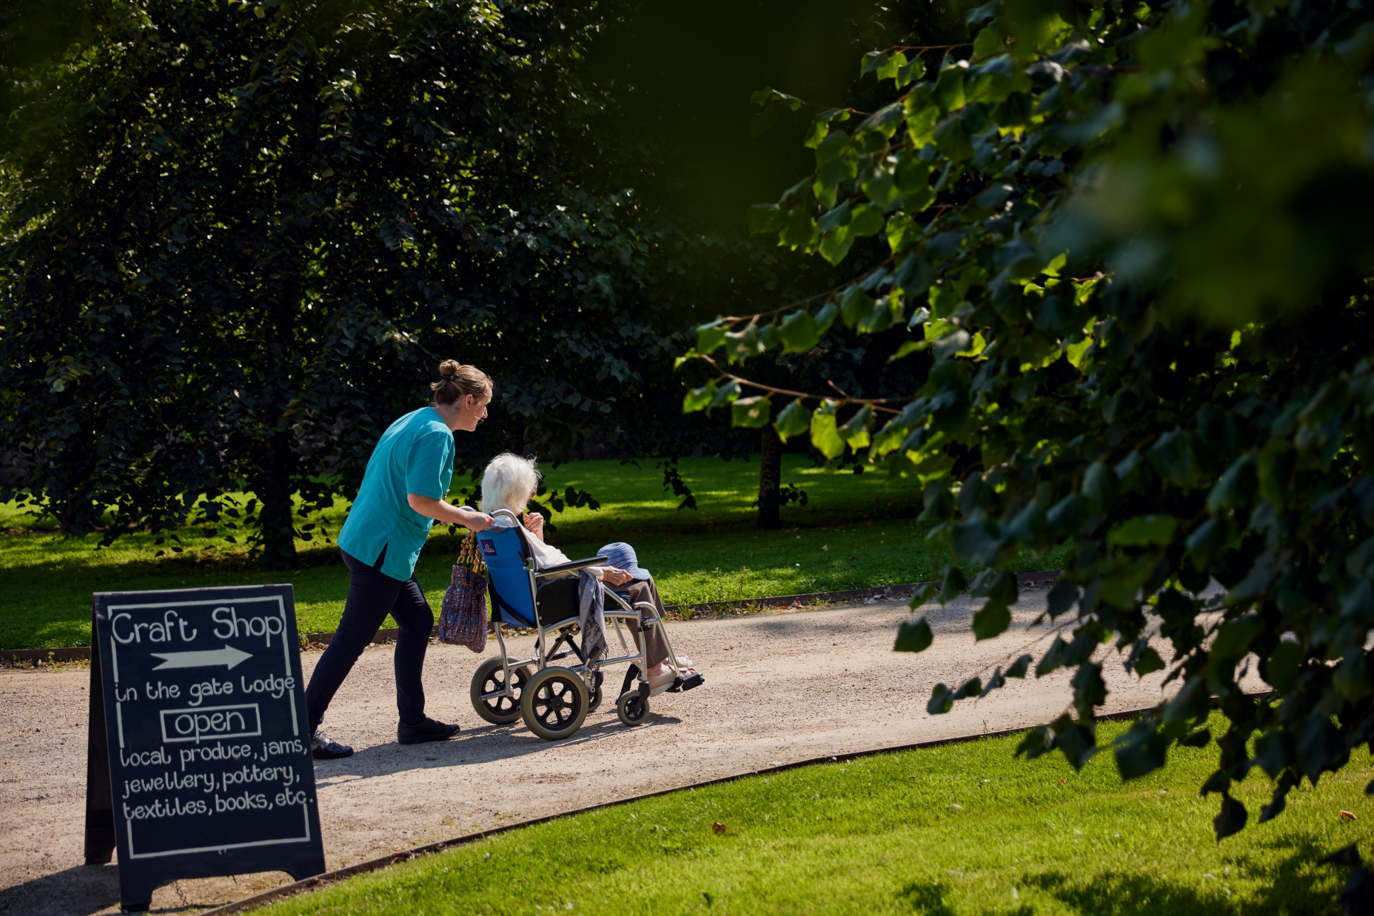 nursing home worker in Borris Lodge Nursing Home wheeling a resident along a wooded path with a sign for a cafe